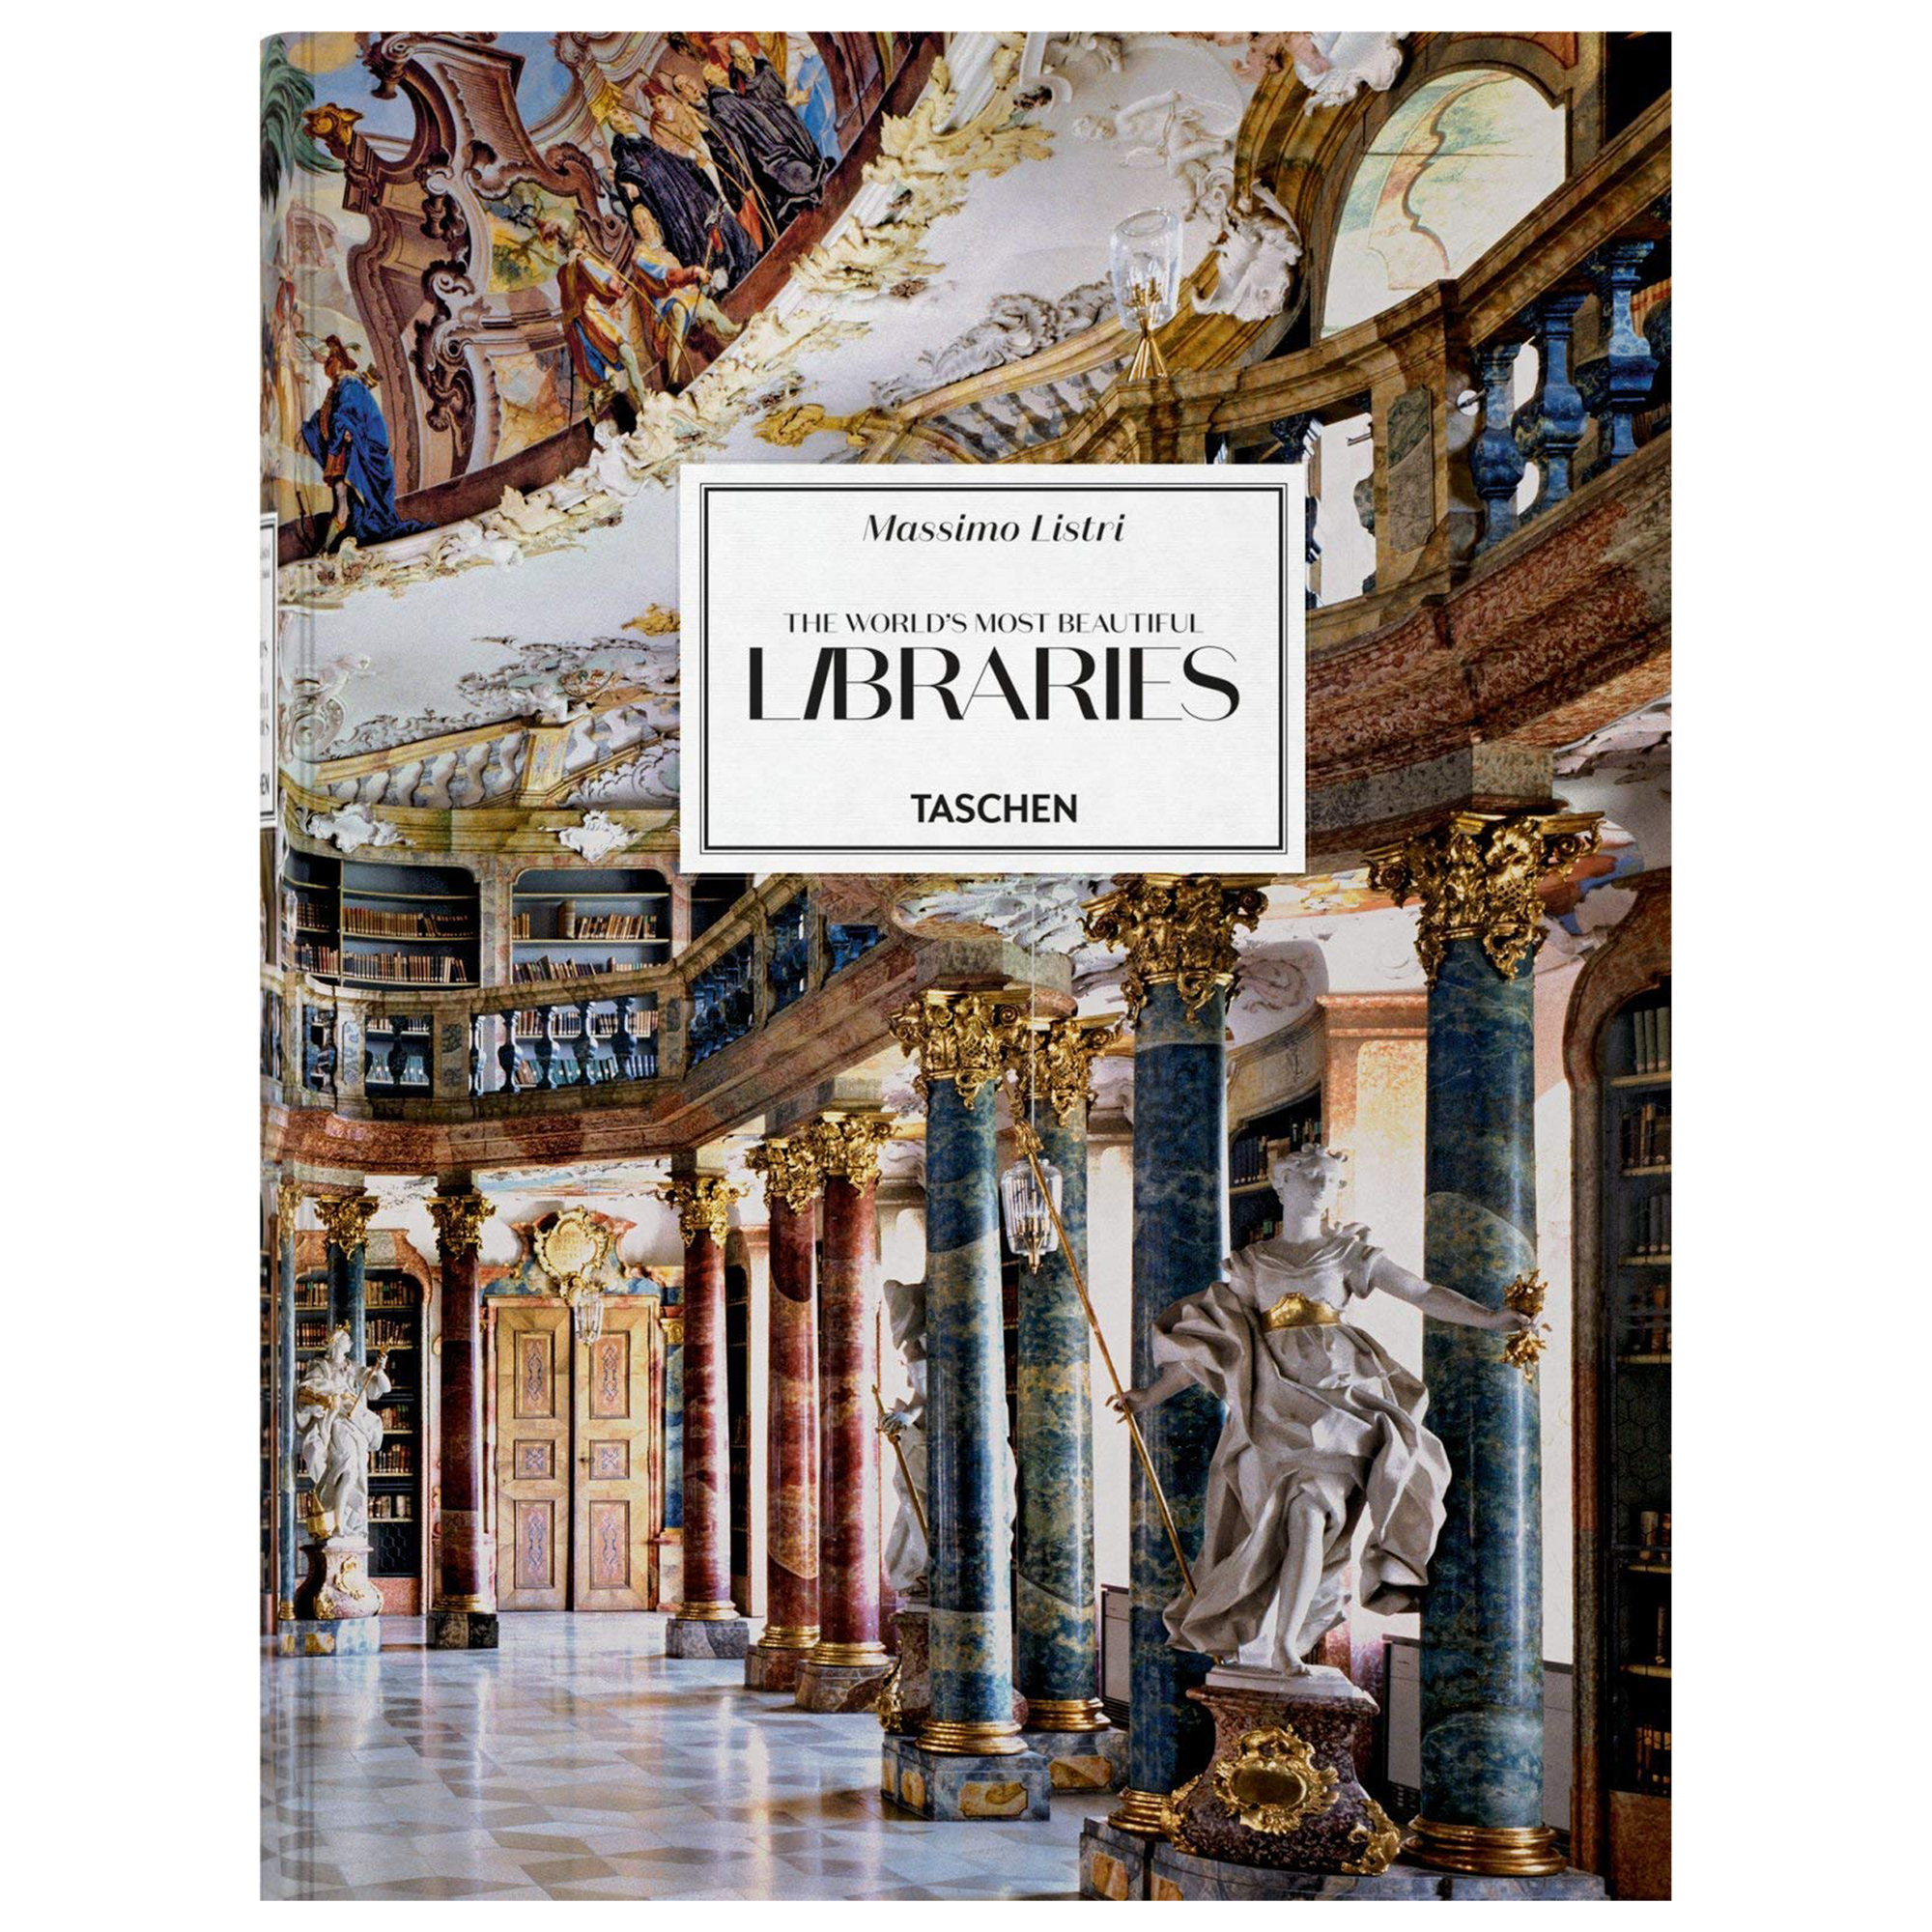 In this new photographic journey, Massimo Listri travels to some of the oldest and finest libraries to reveal their architectural, historical, and imaginative wonder.